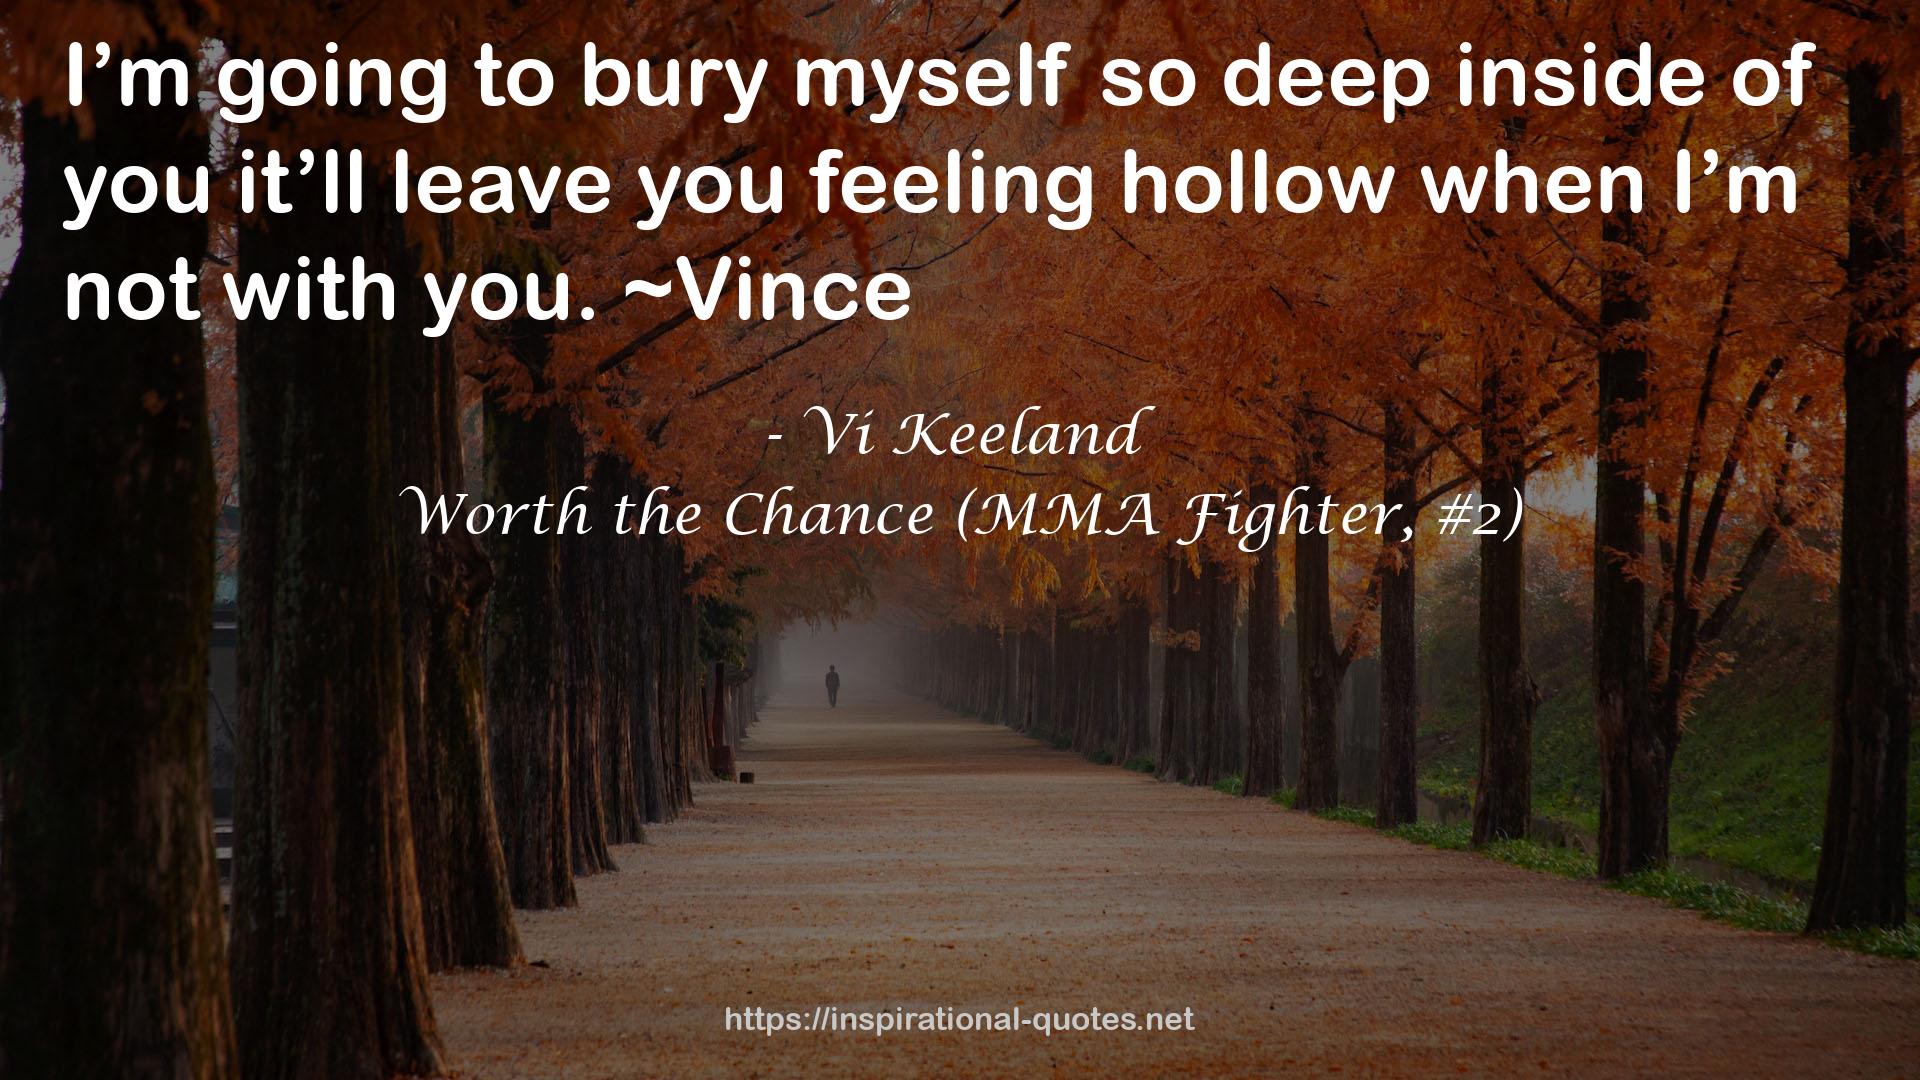 Worth the Chance (MMA Fighter, #2) QUOTES